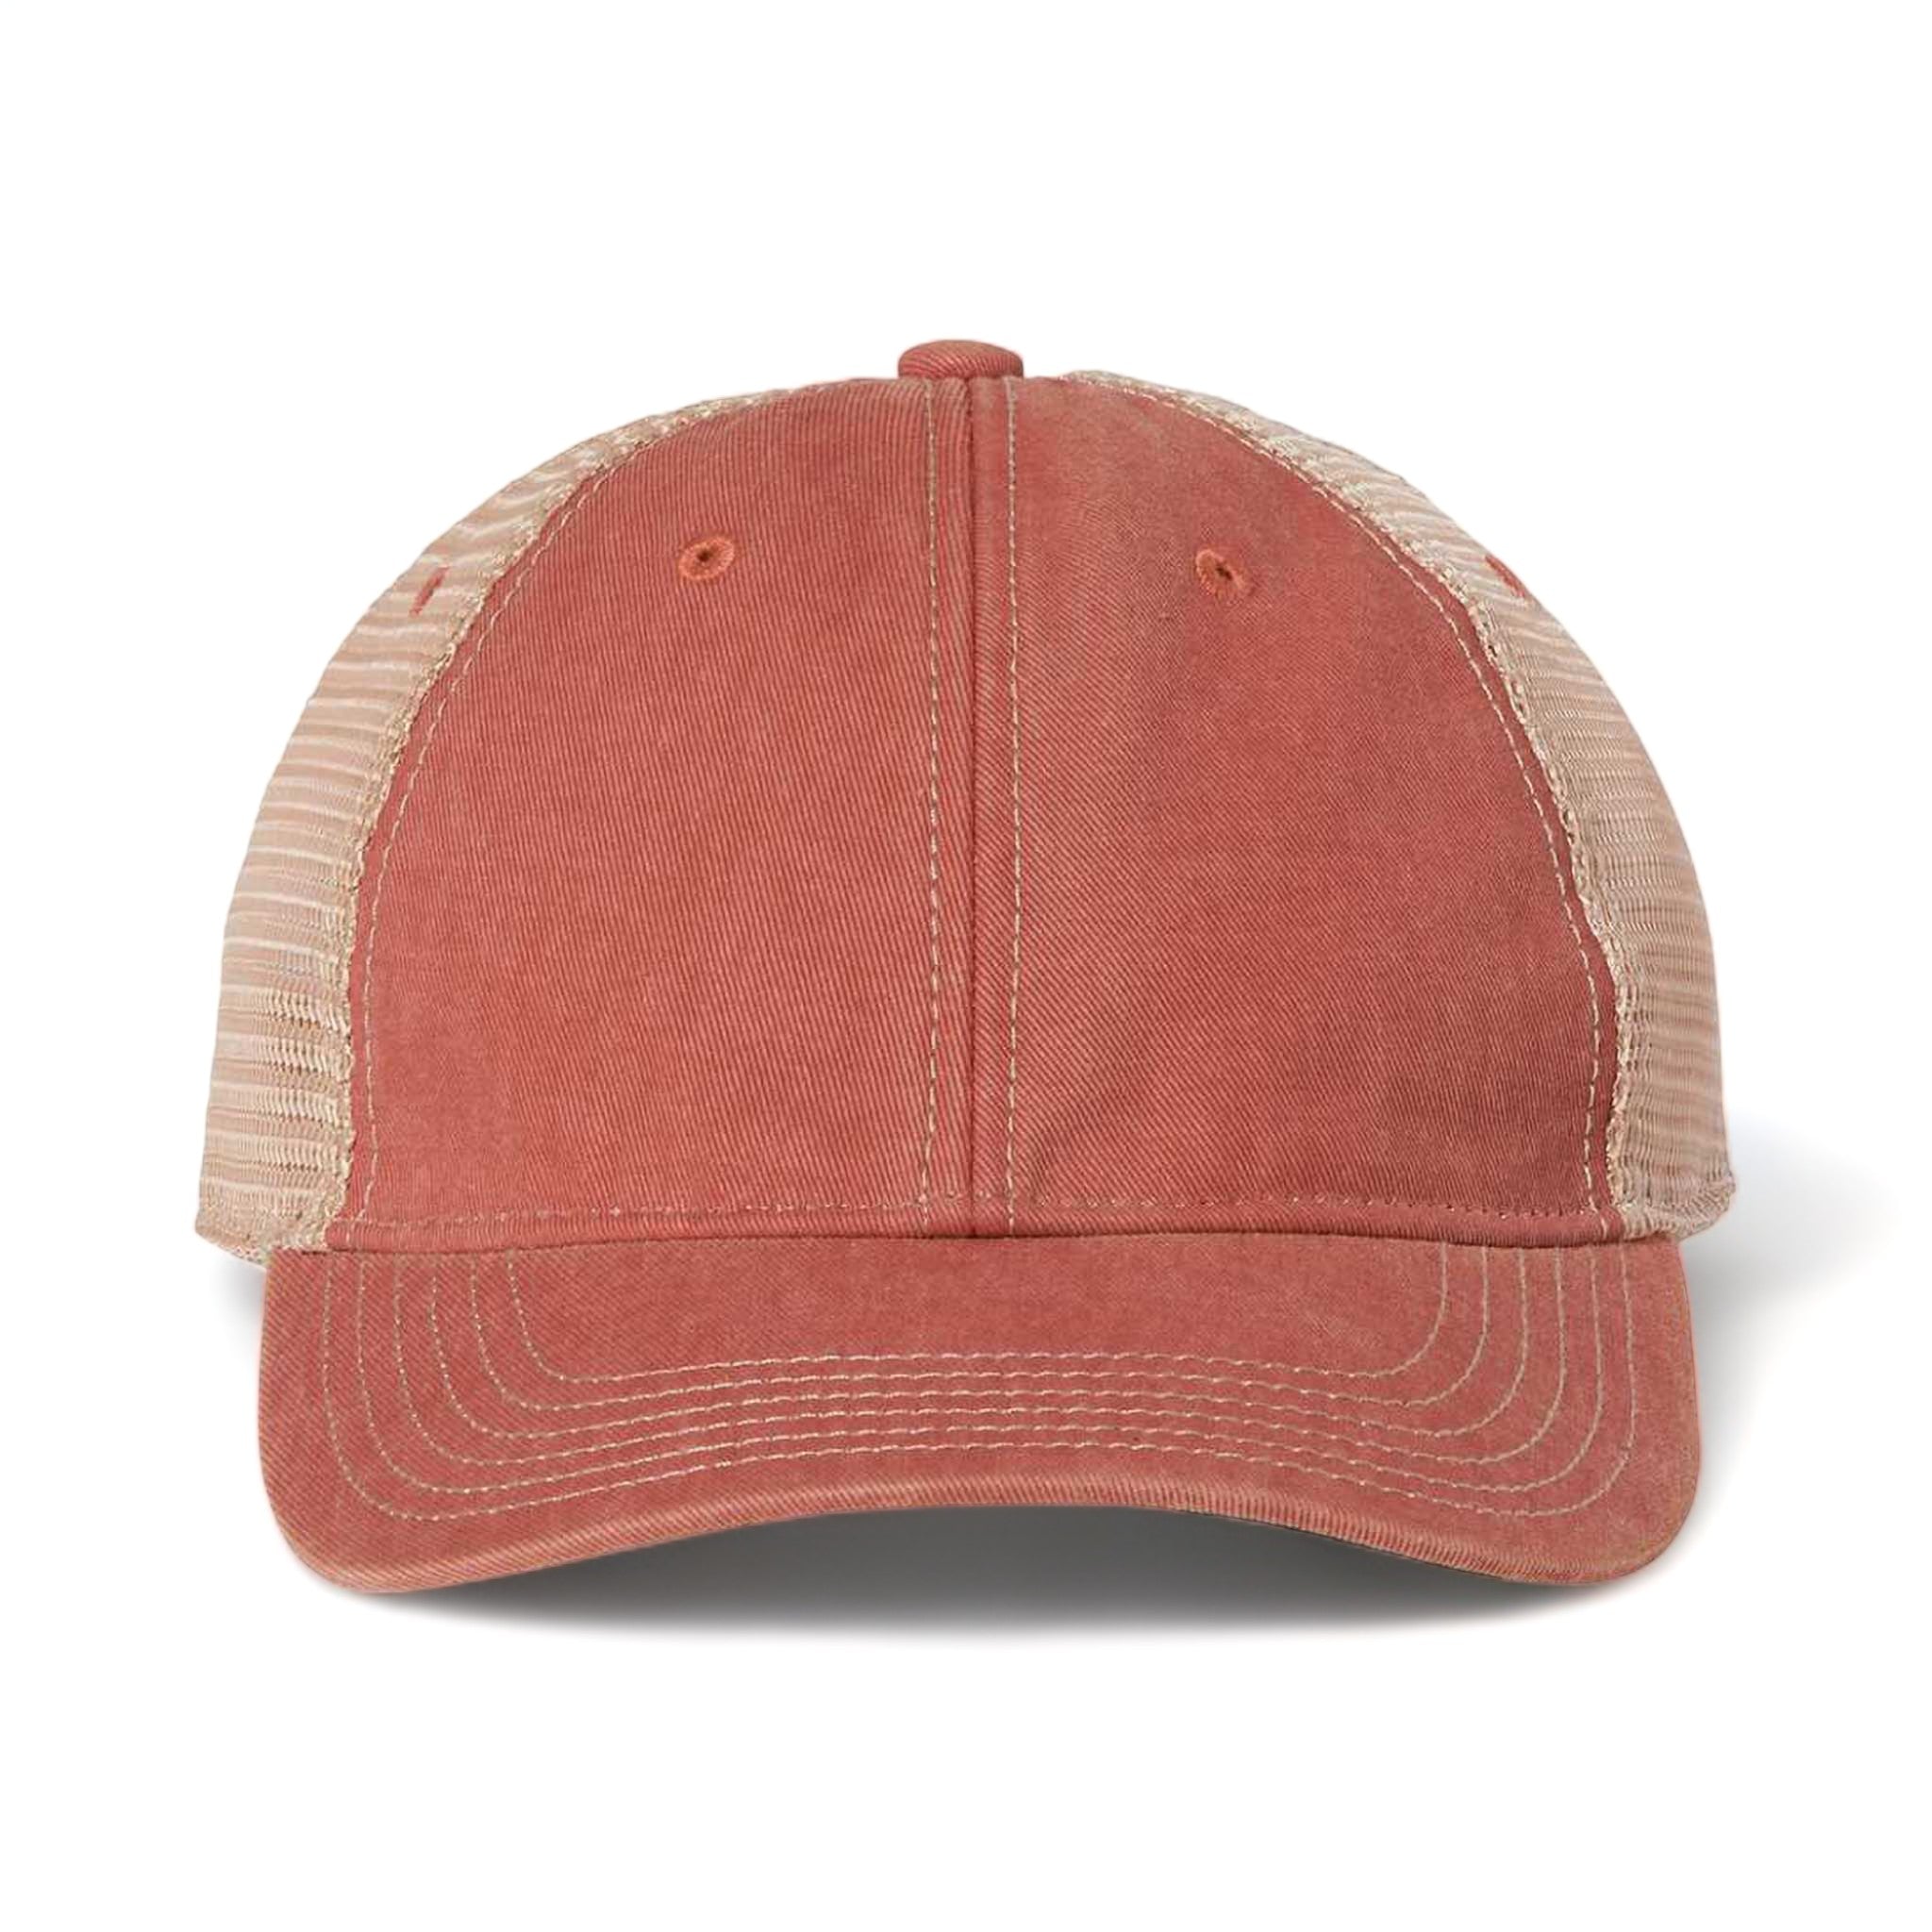 Front view of LEGACY OFA custom hat in nantucket red and khaki